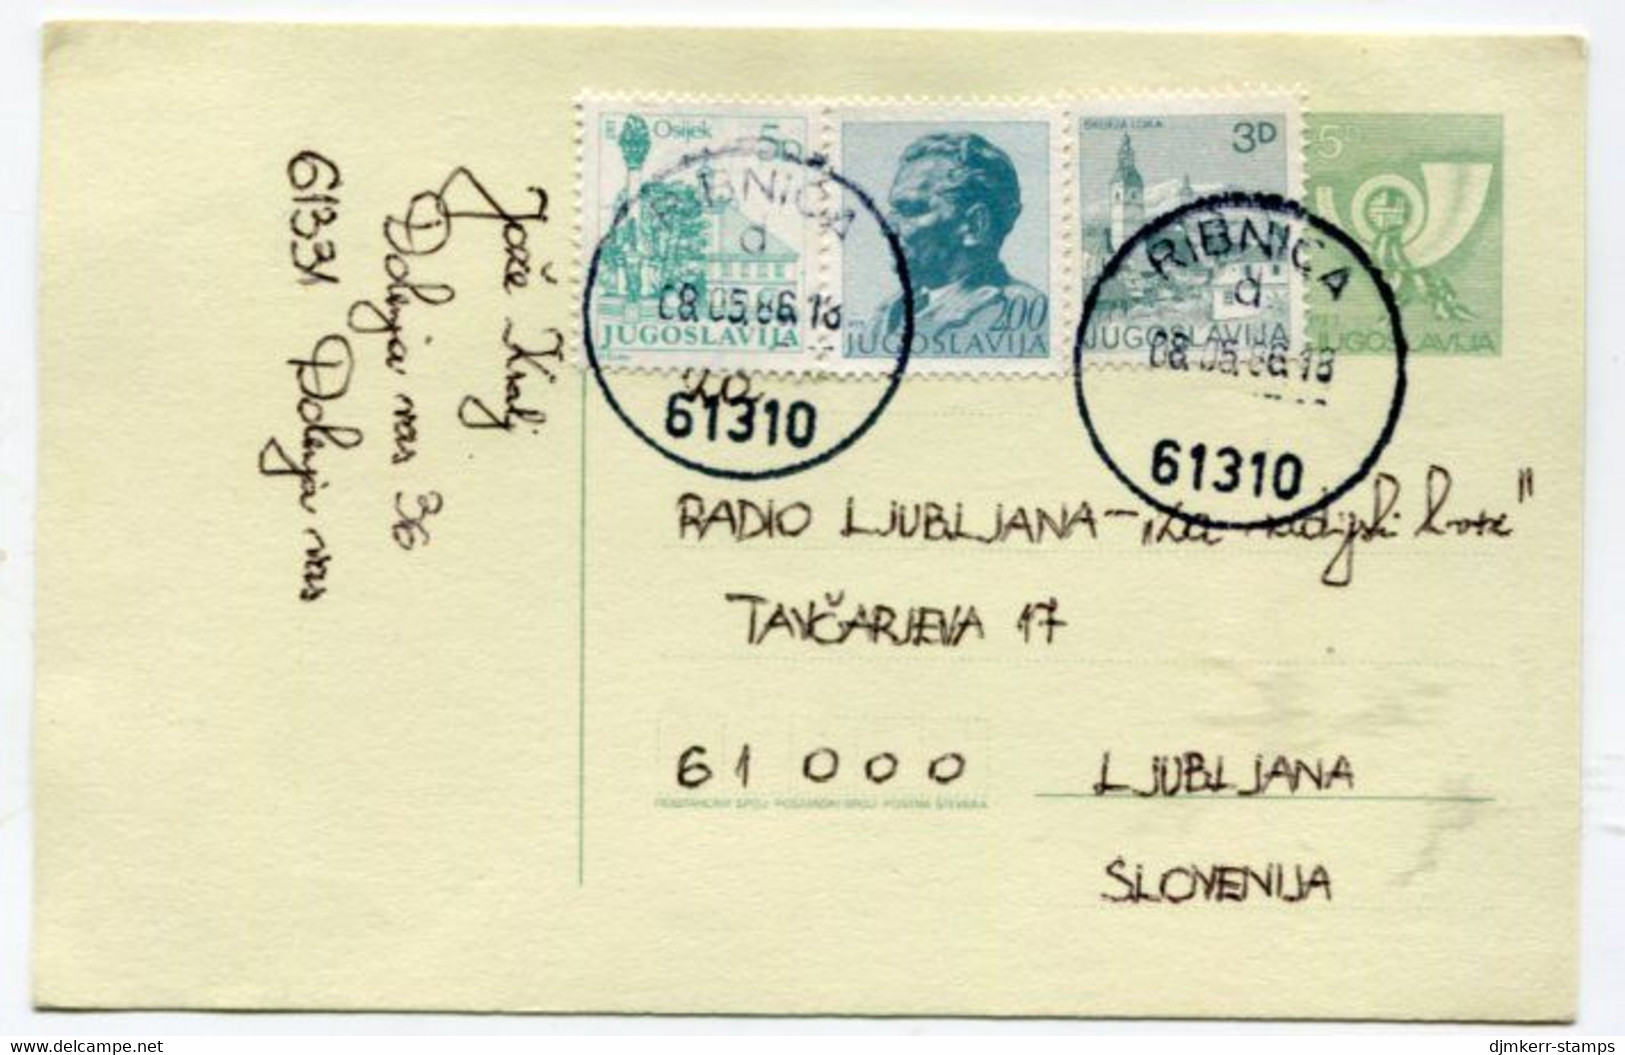 YUGOSLAVIA 1984 Posthorn 5 D. Stationery Card Used With Additional Franking.  Michel  P185 - Ganzsachen